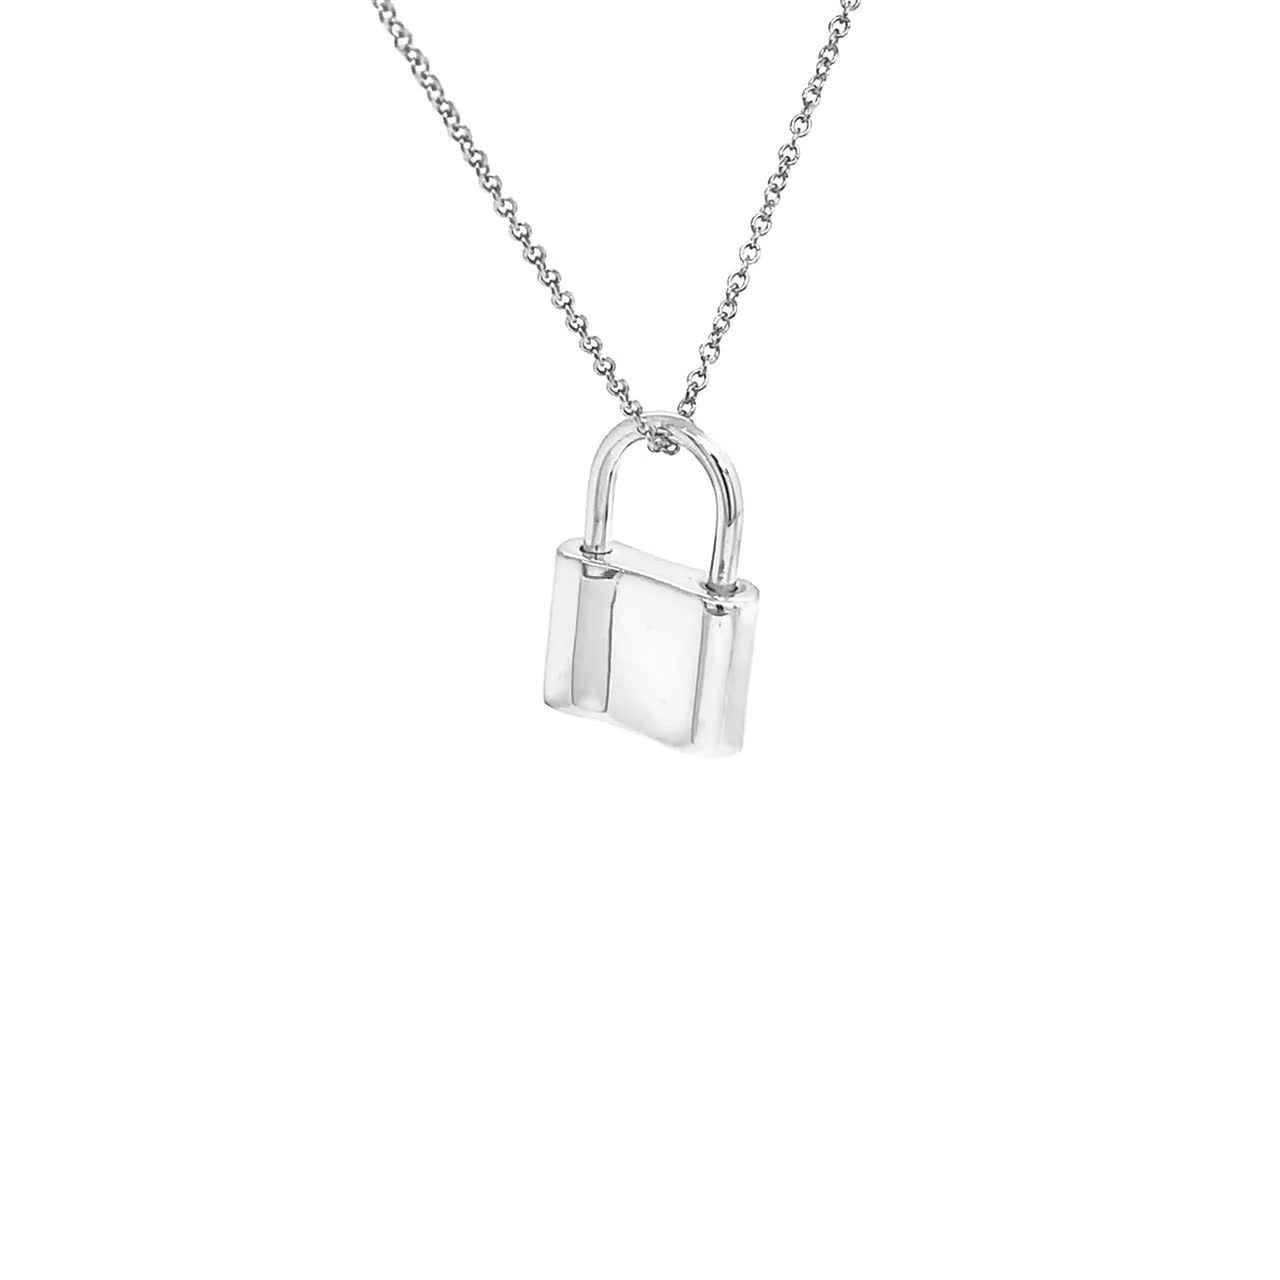 Functional Lock Pendant Necklace in 925 Sterling Silver, Engravable Necklace Nickel Free